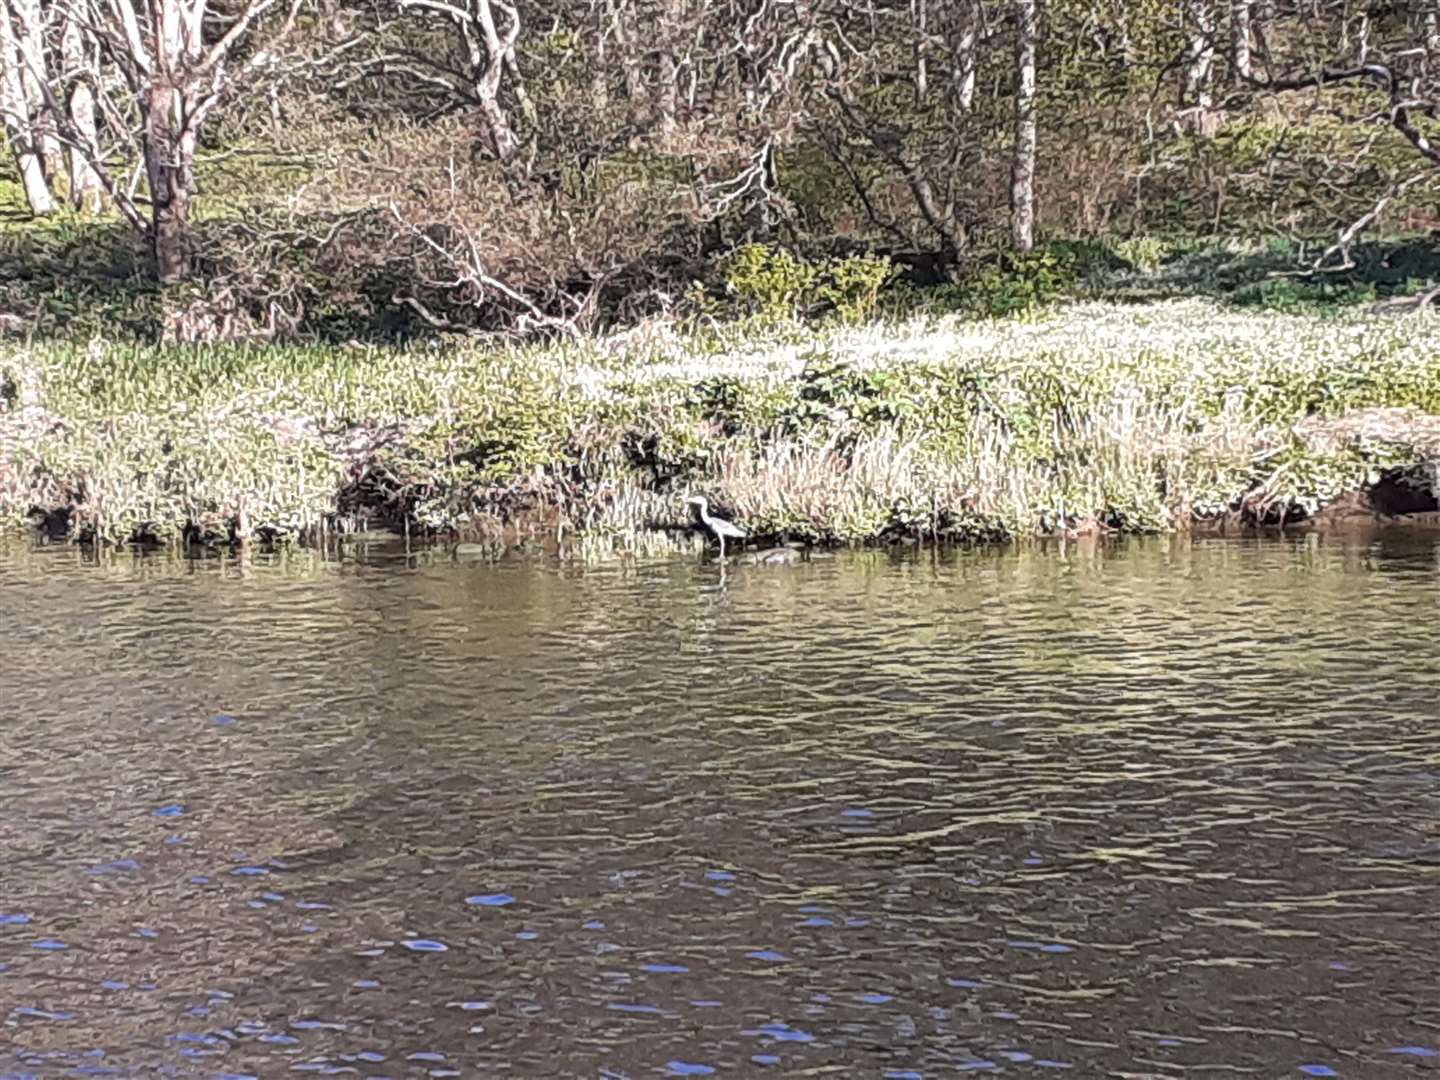 A heron fishes on the River Deveron.